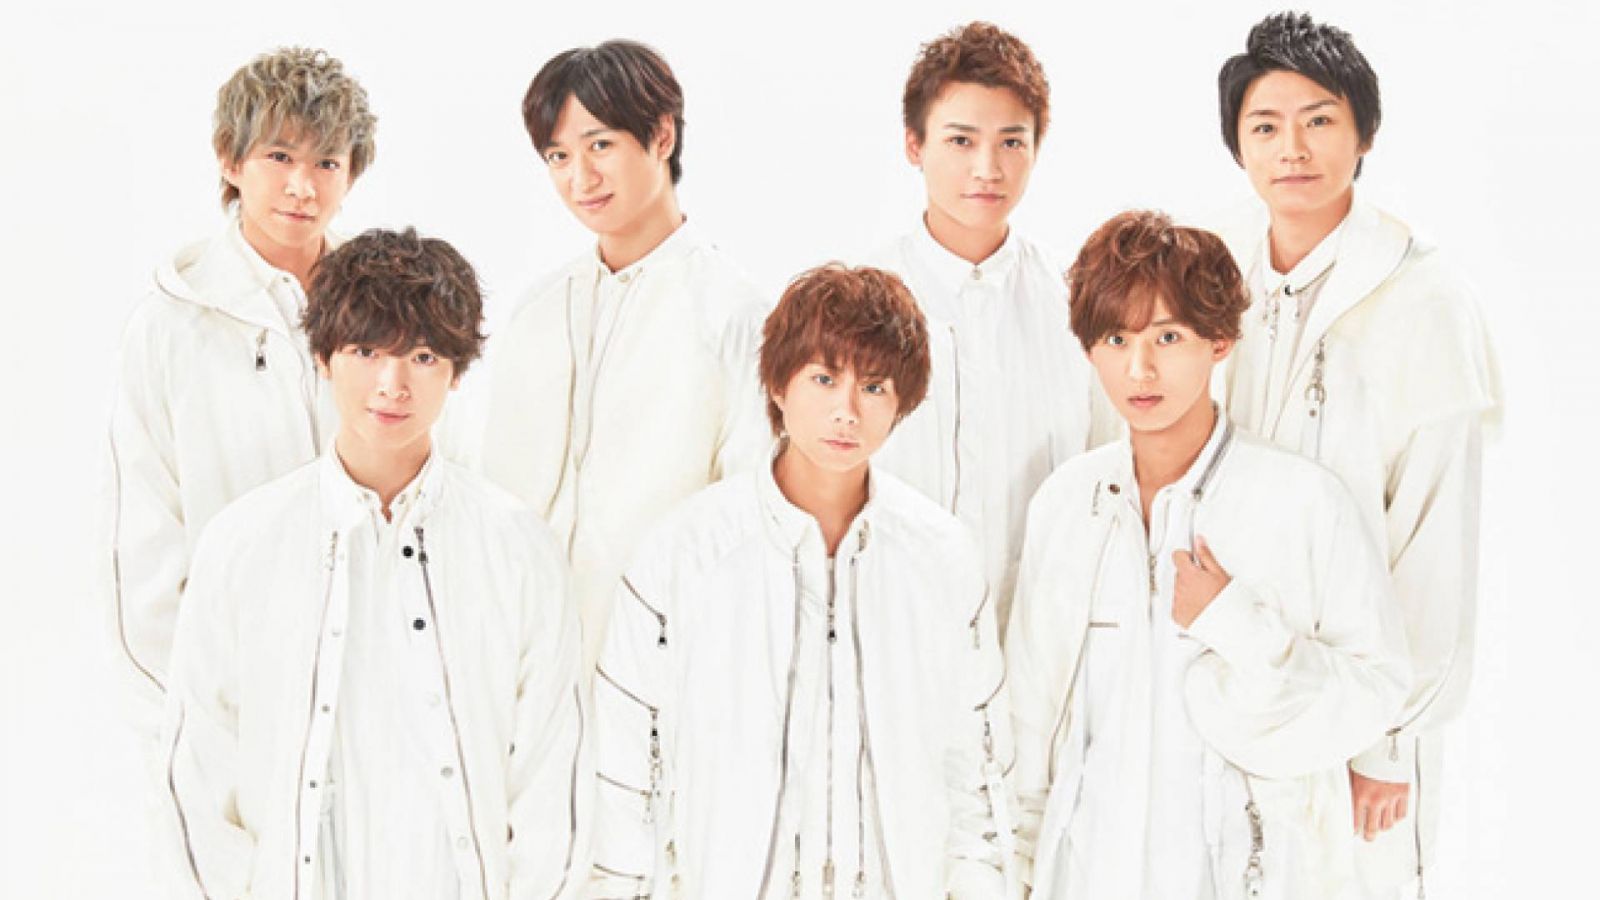 New Single from Kis-My-Ft2 © avex trax. All rights reserved.